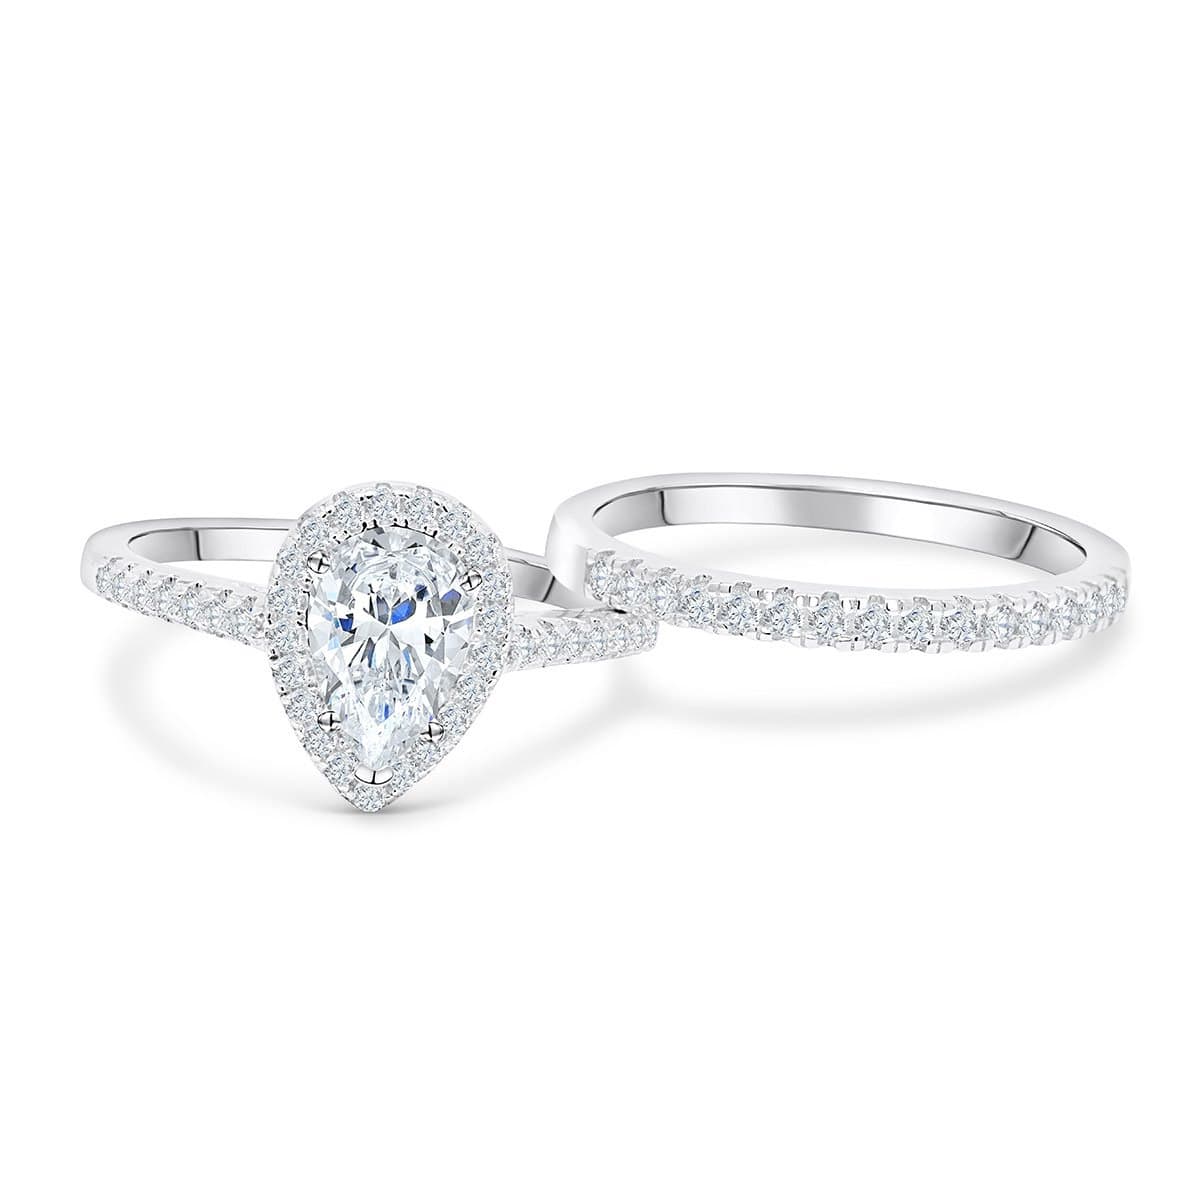 Modern Gents Trading Co Women's Bliss Engagement Ring